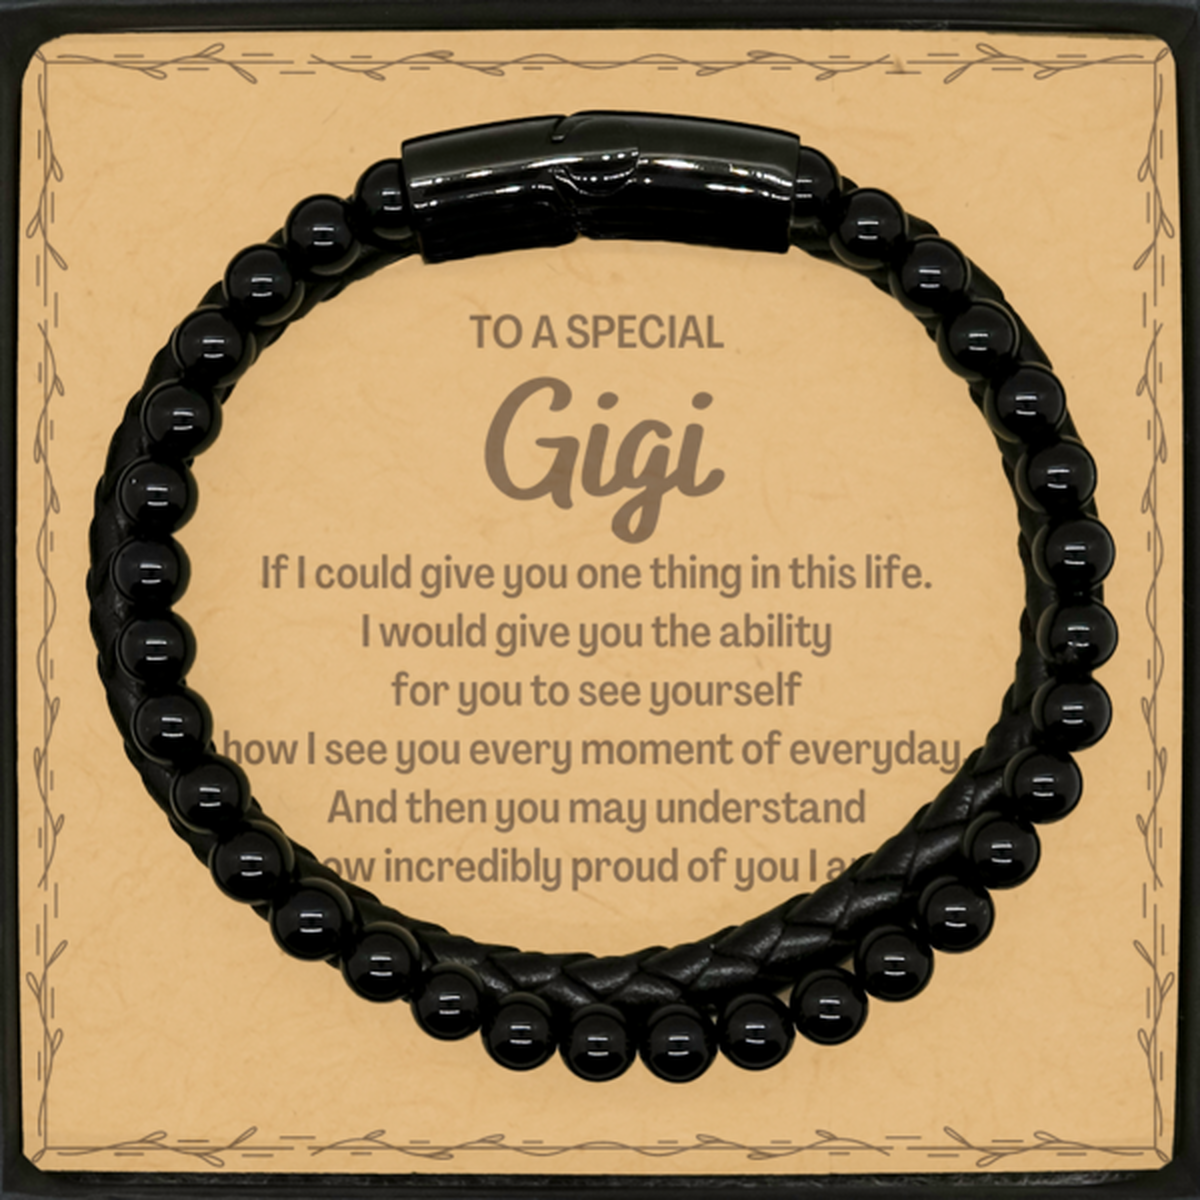 To My Gigi Stone Leather Bracelets, Gifts For Gigi Message Card, Inspirational Gifts for Christmas Birthday, Epic Gifts for Gigi To A Special Gigi how incredibly proud of you I am